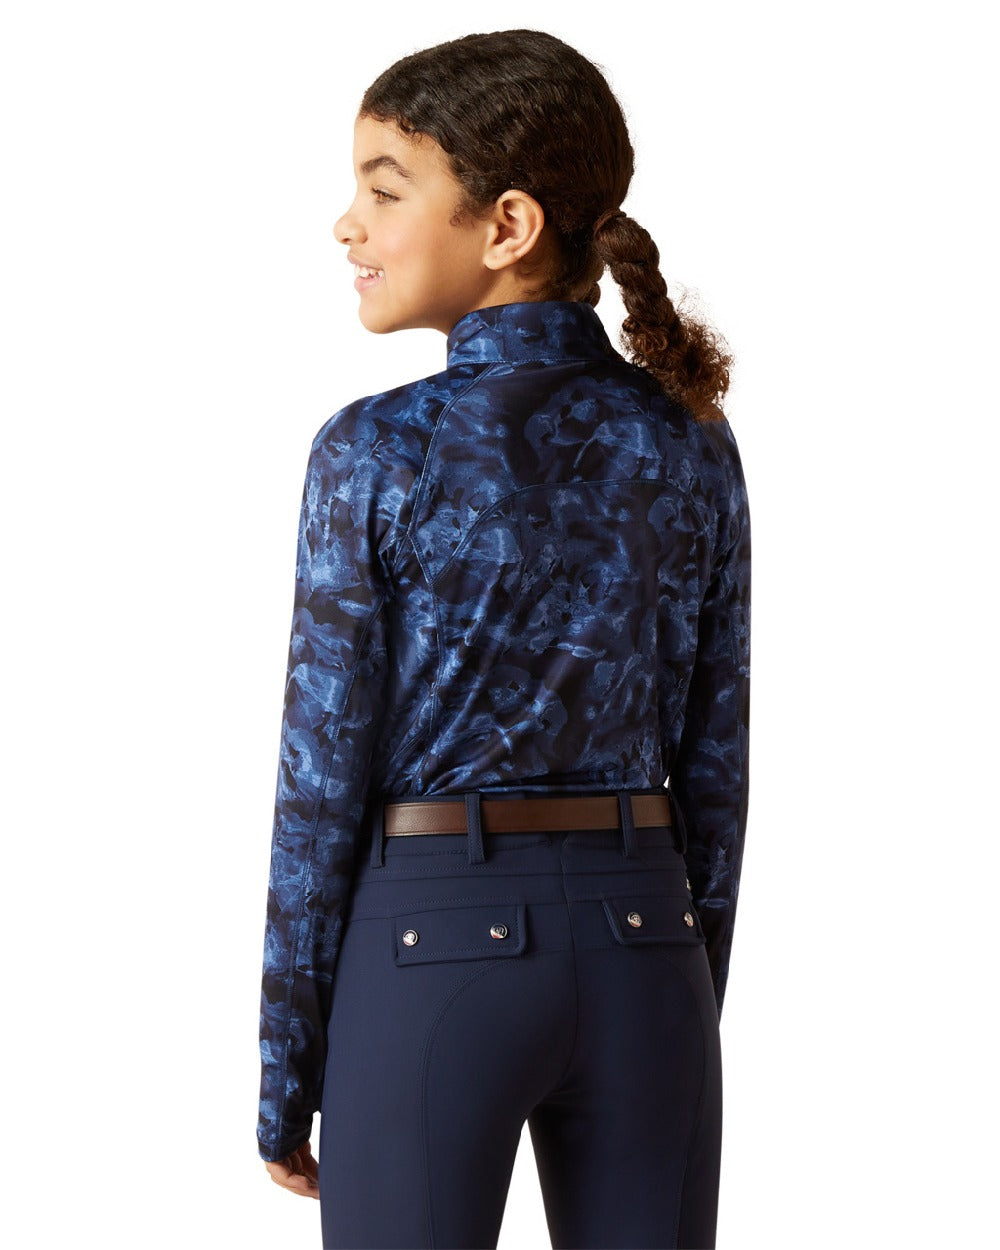 Ariat Childrens Lowell 2.0 1/4 Zip Base Layer in Stormy Skies 